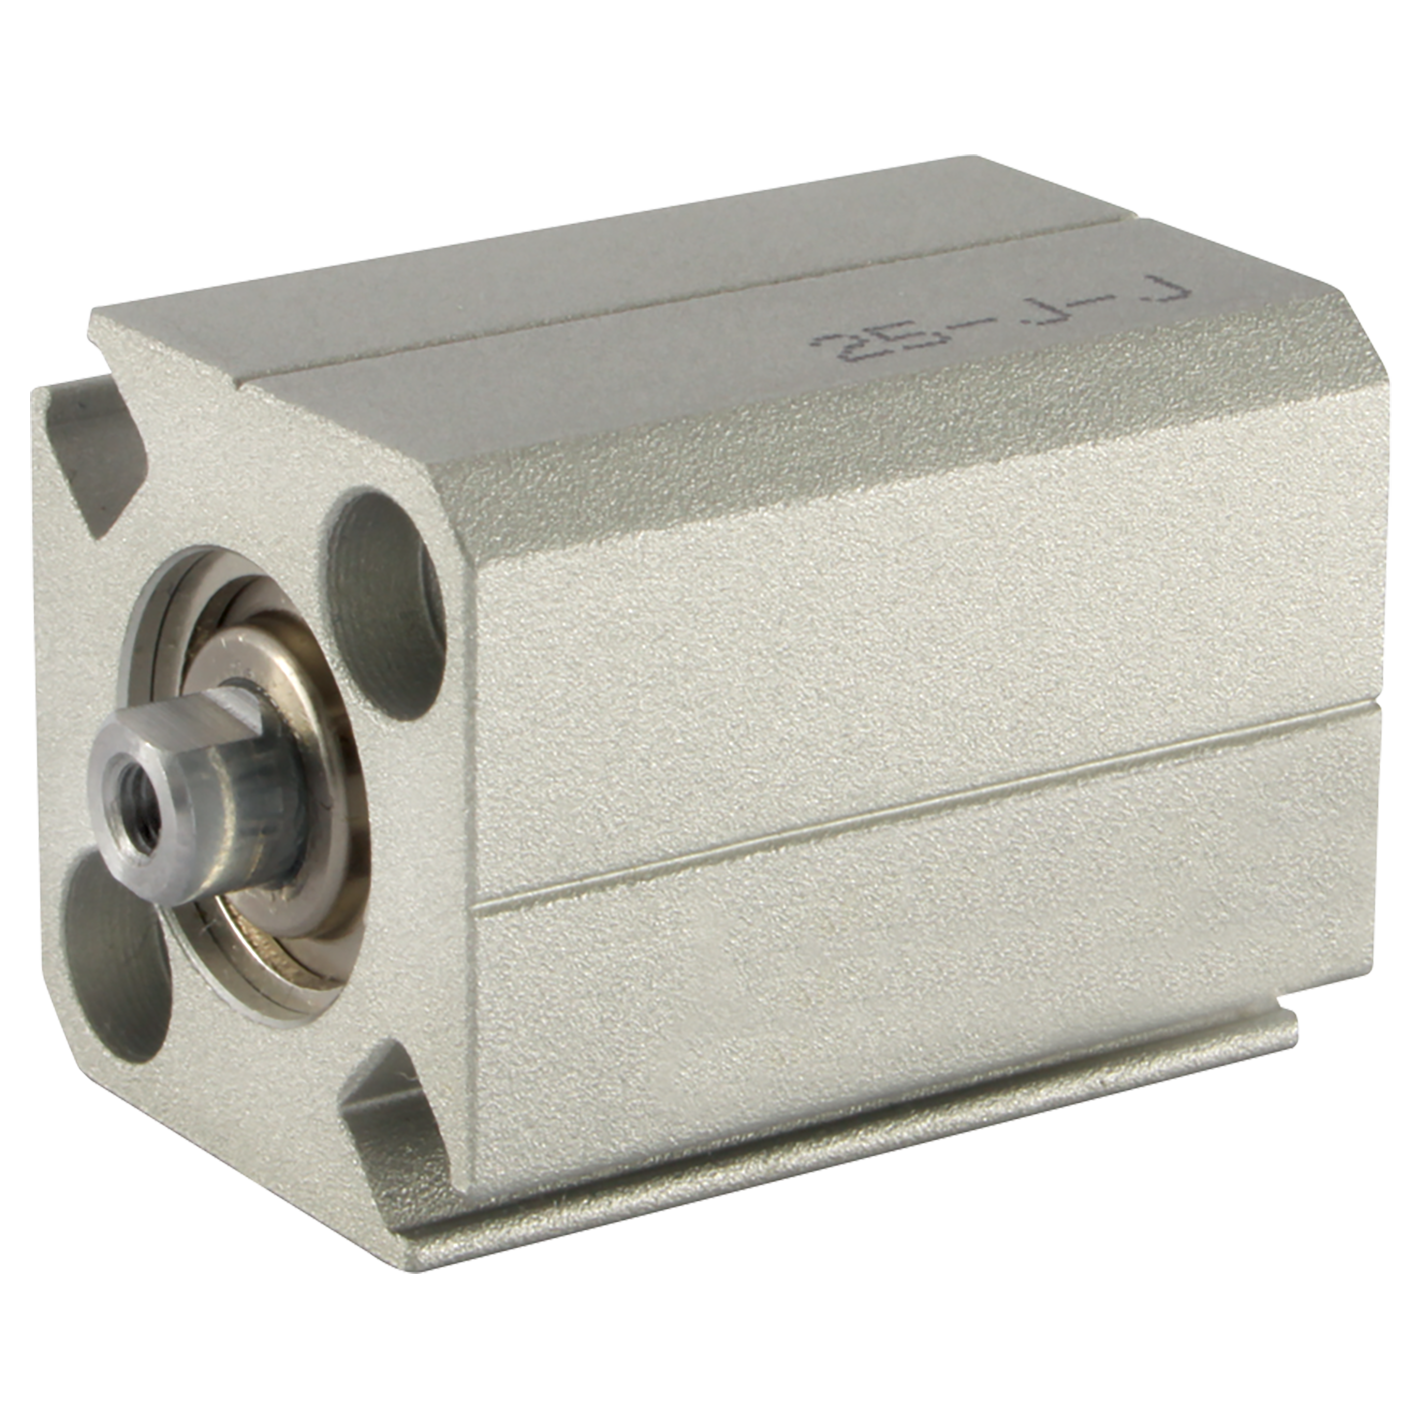 1/8" BSP Parallel Female Ports Pneumatic Cylinder Compact Cylinder